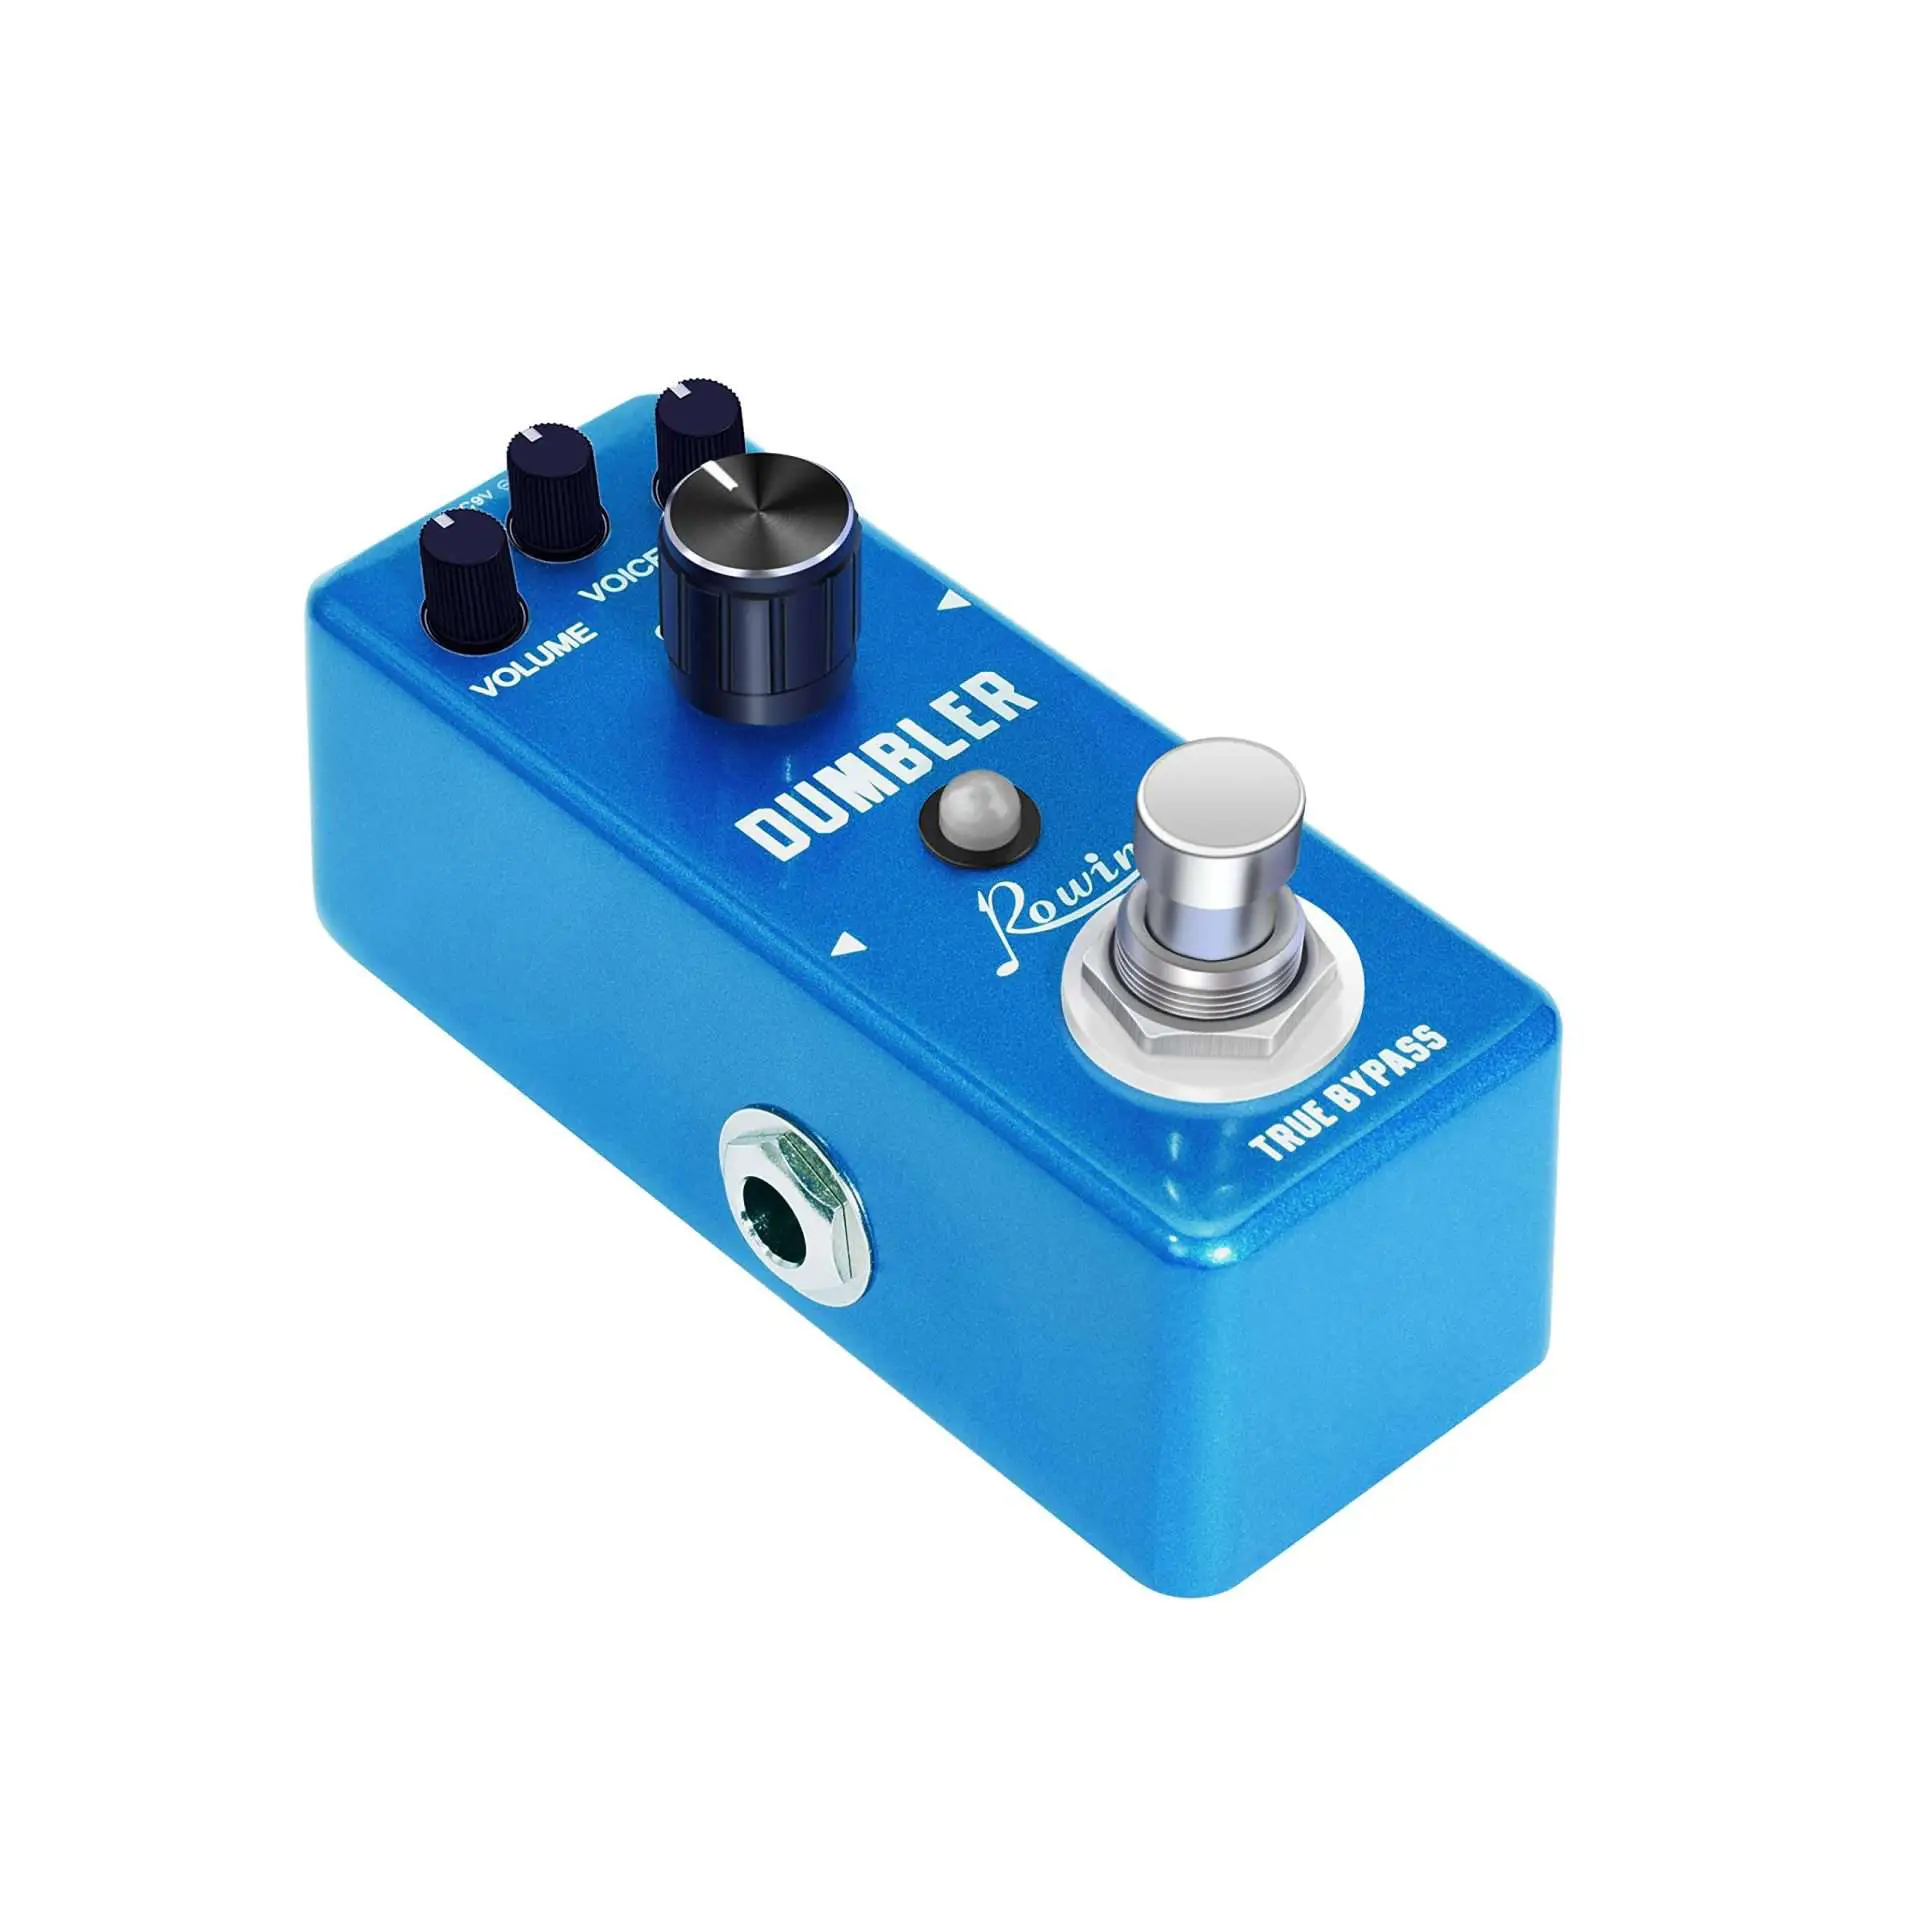 Rowin Dumbler Overdrive Pedal